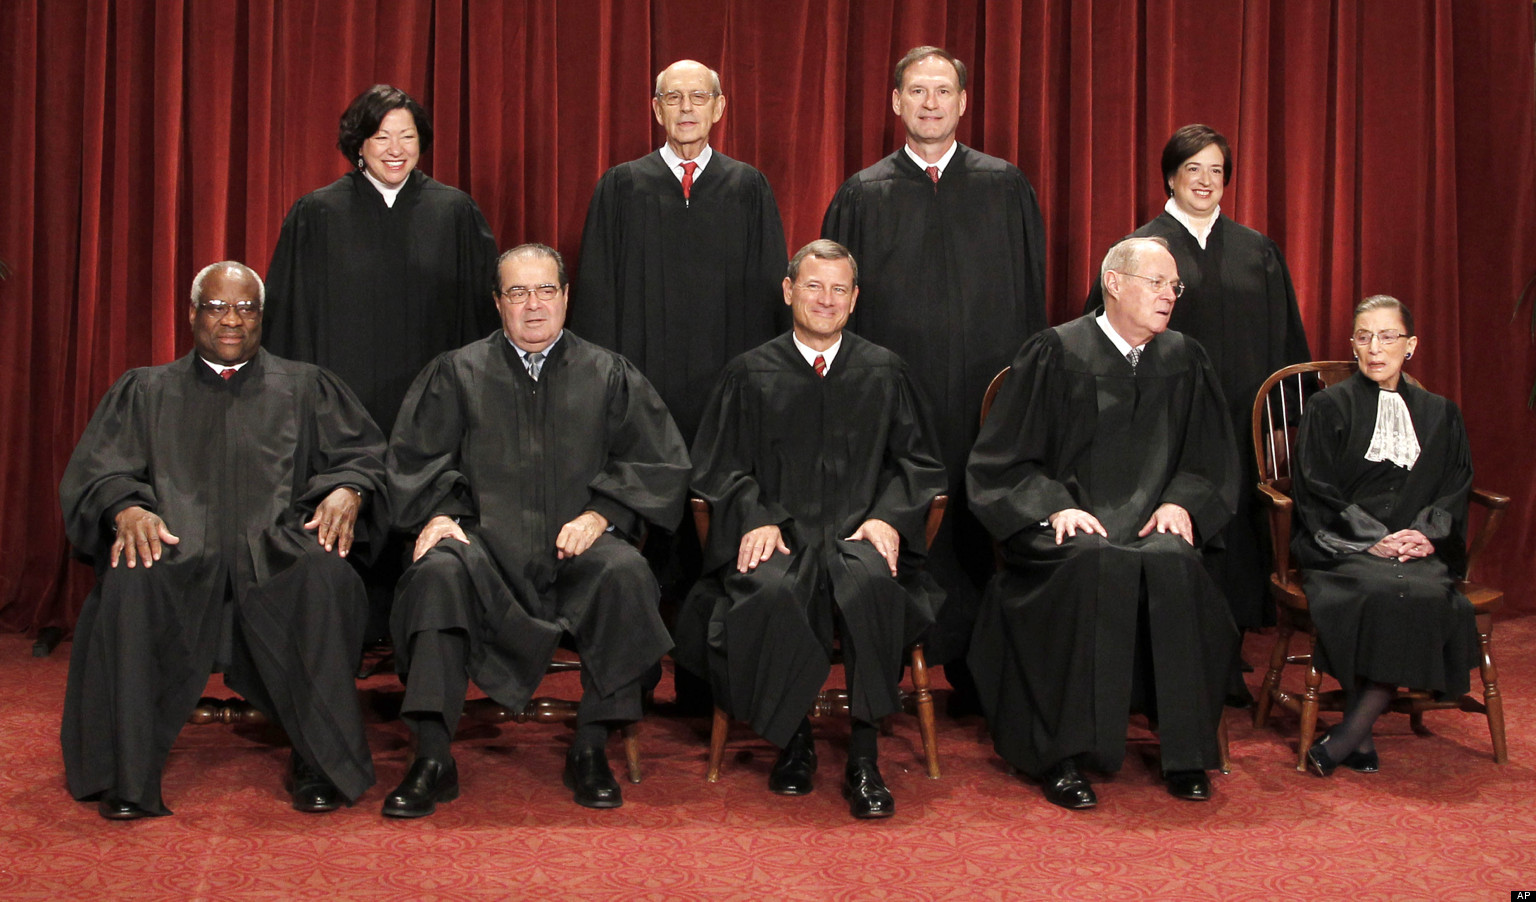 USAfrica: On Same Sex Marriage, U.S Supreme Court says it is Legal; Scalia attacks ruling